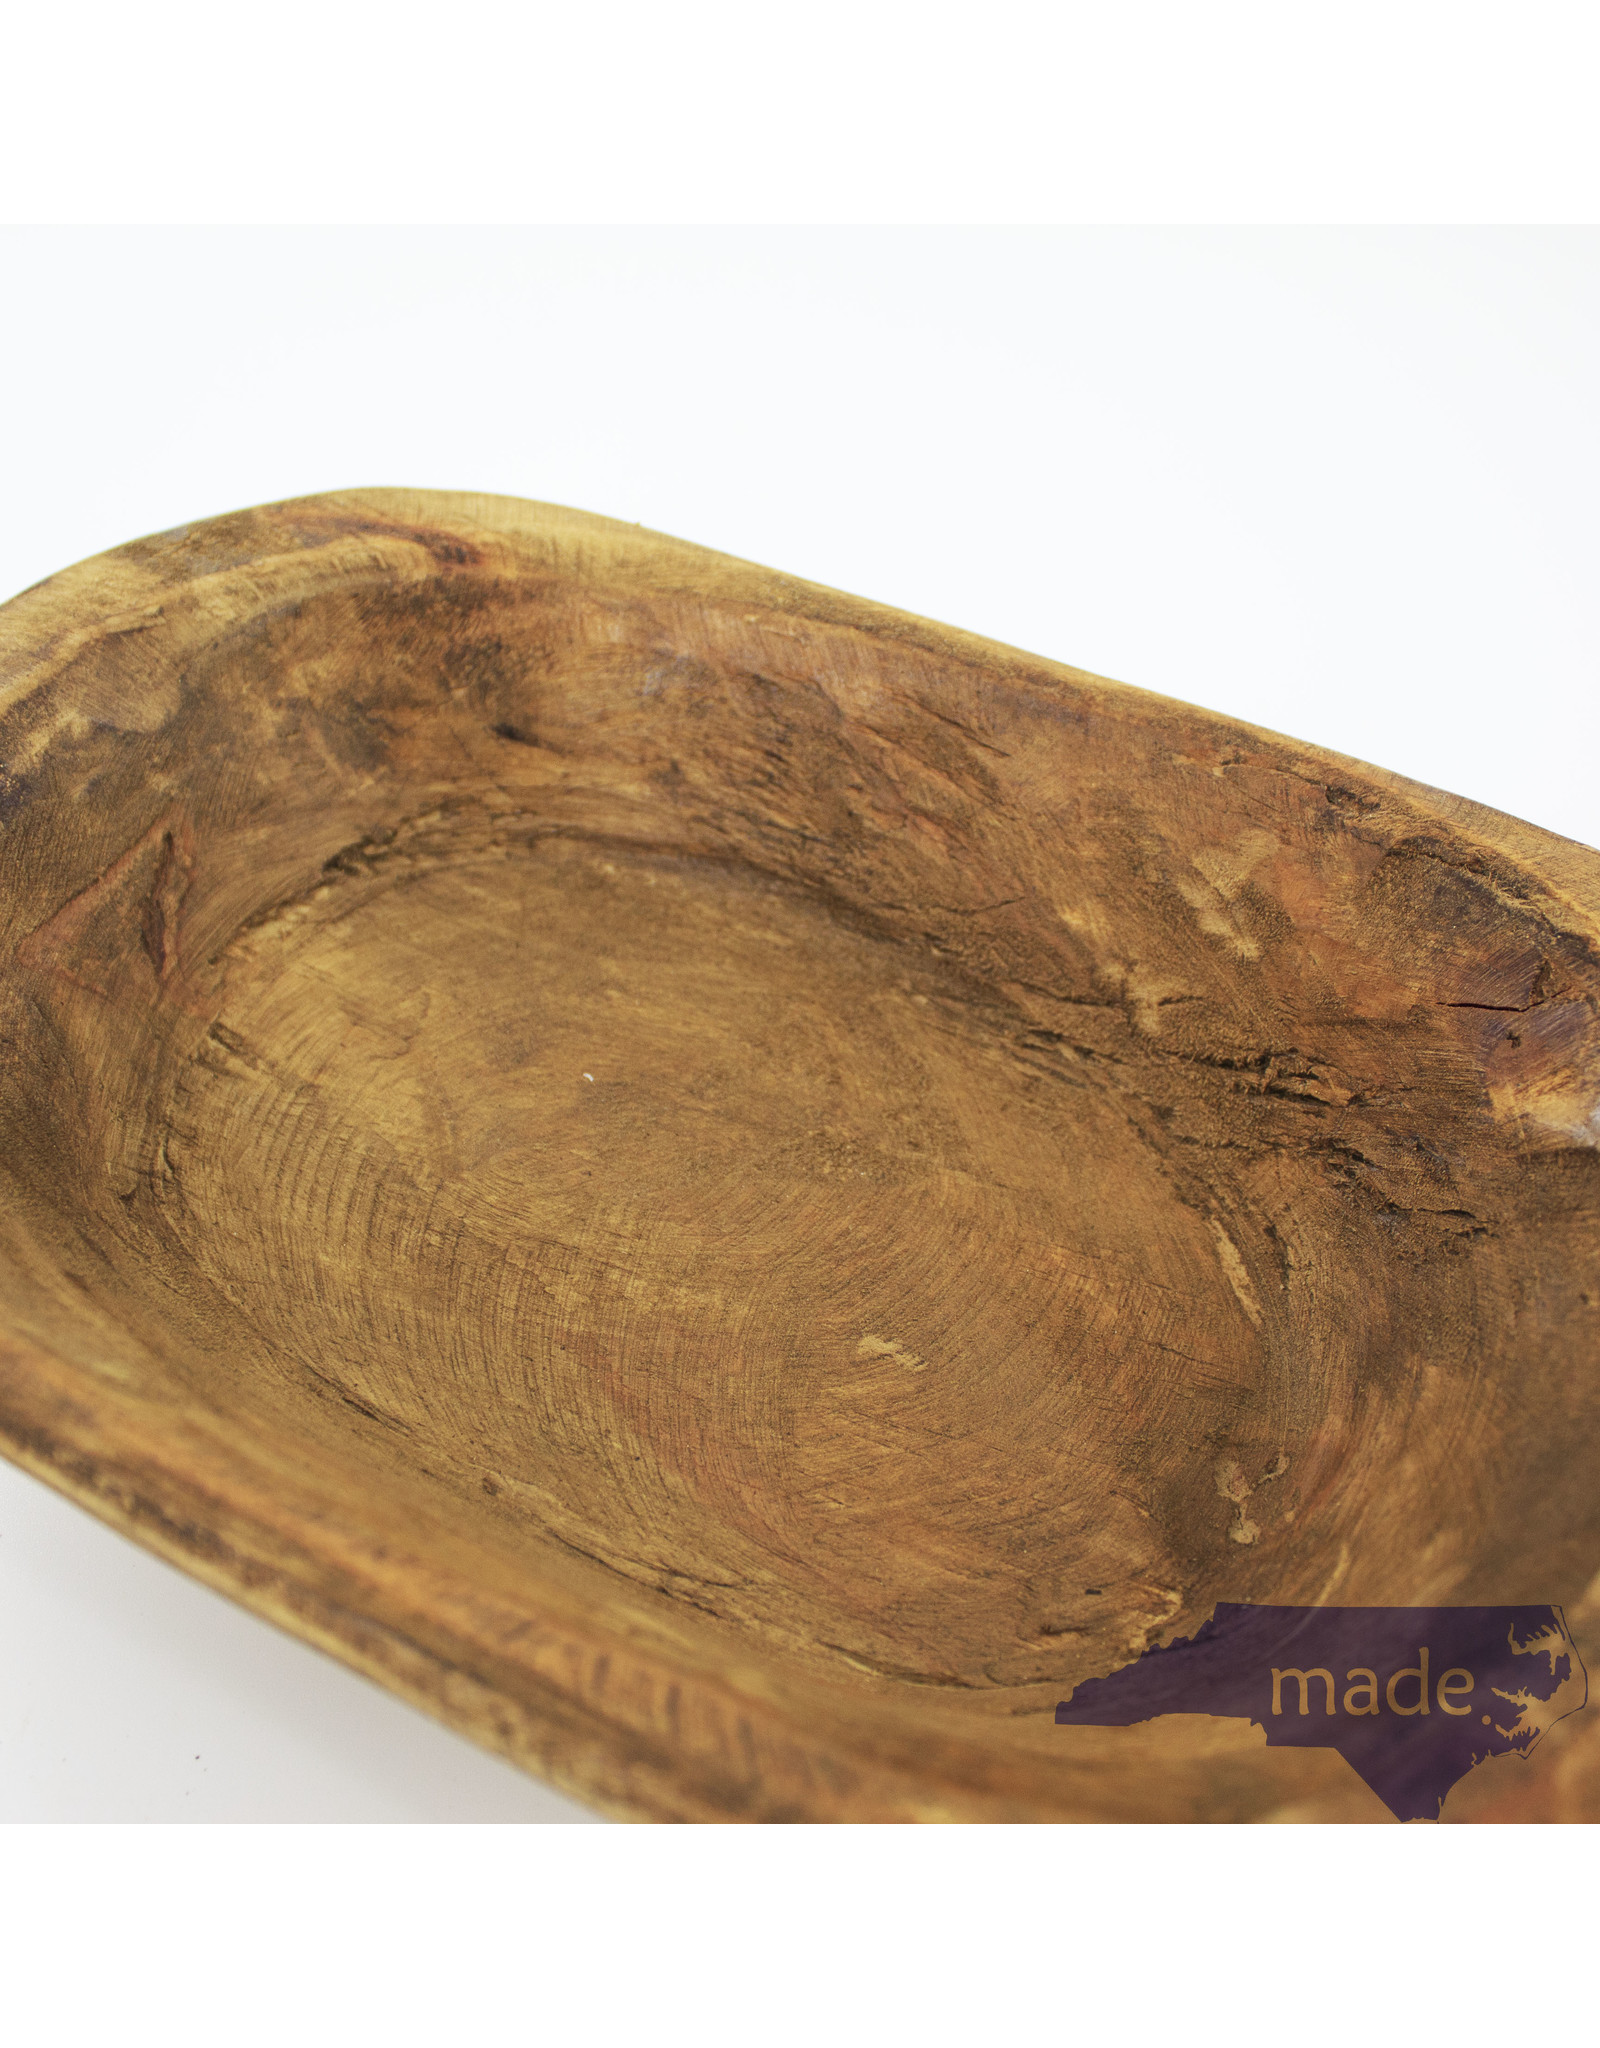 Off the Grid Designs Mini Oval Dough Bowl - Off the Grid Designs